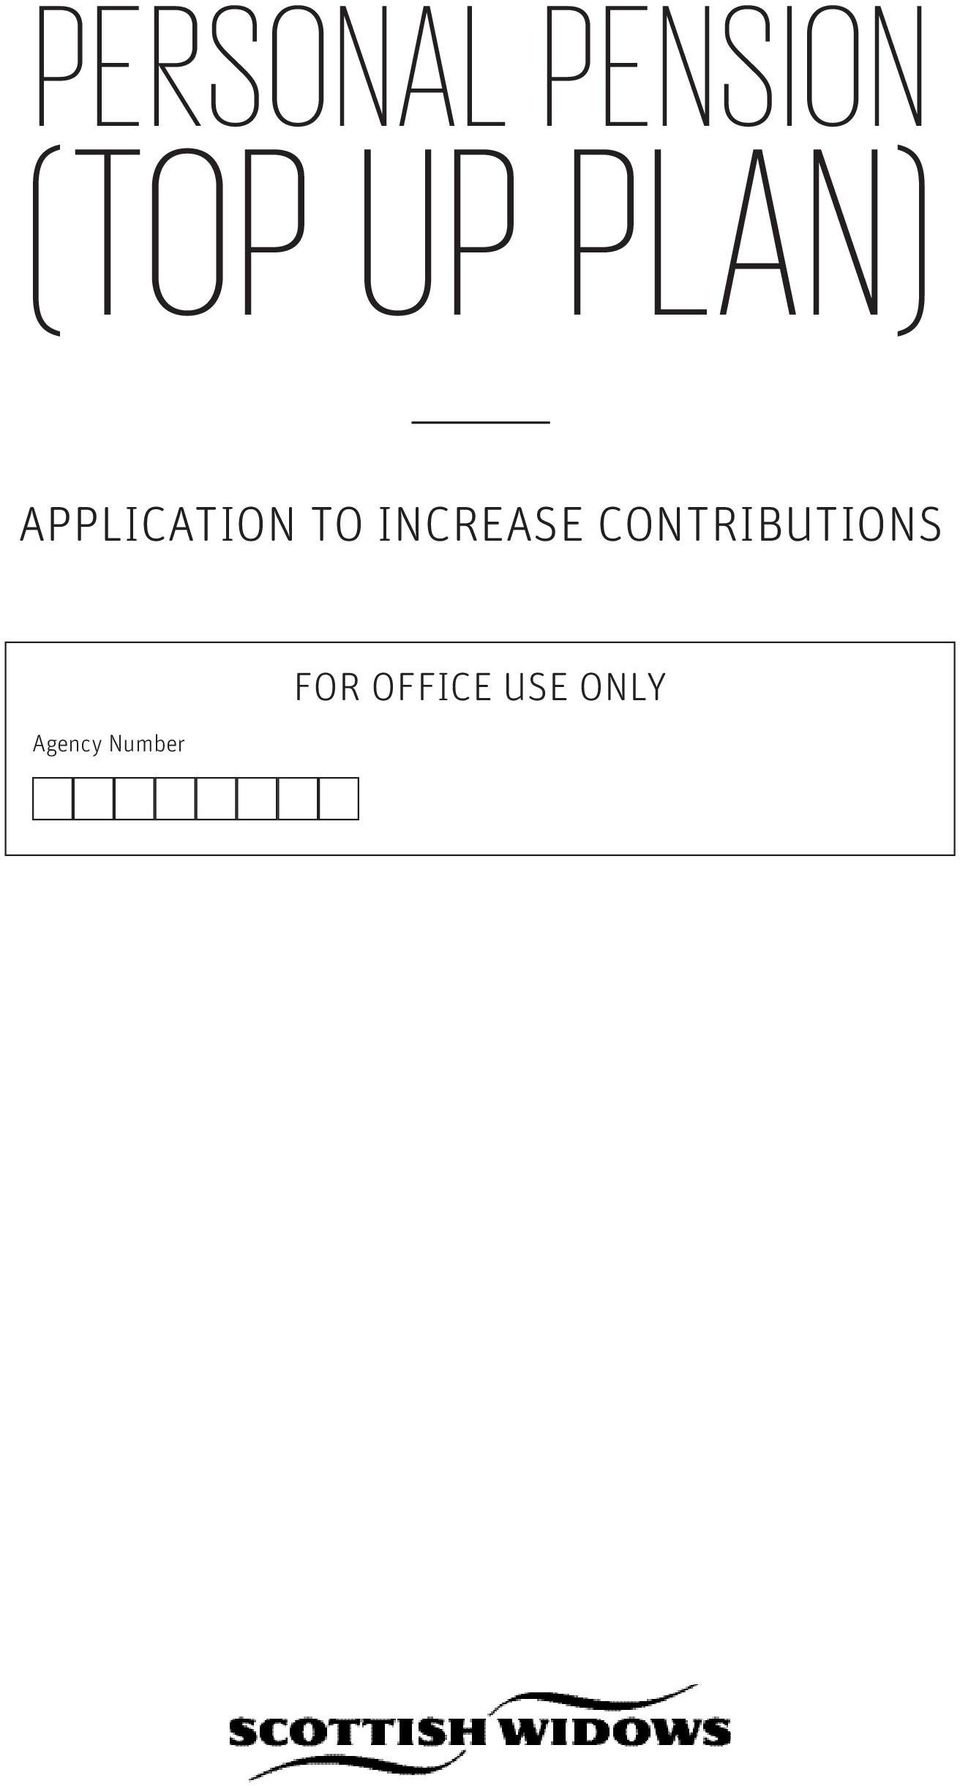 INCREASE CONTRIBUTIONS